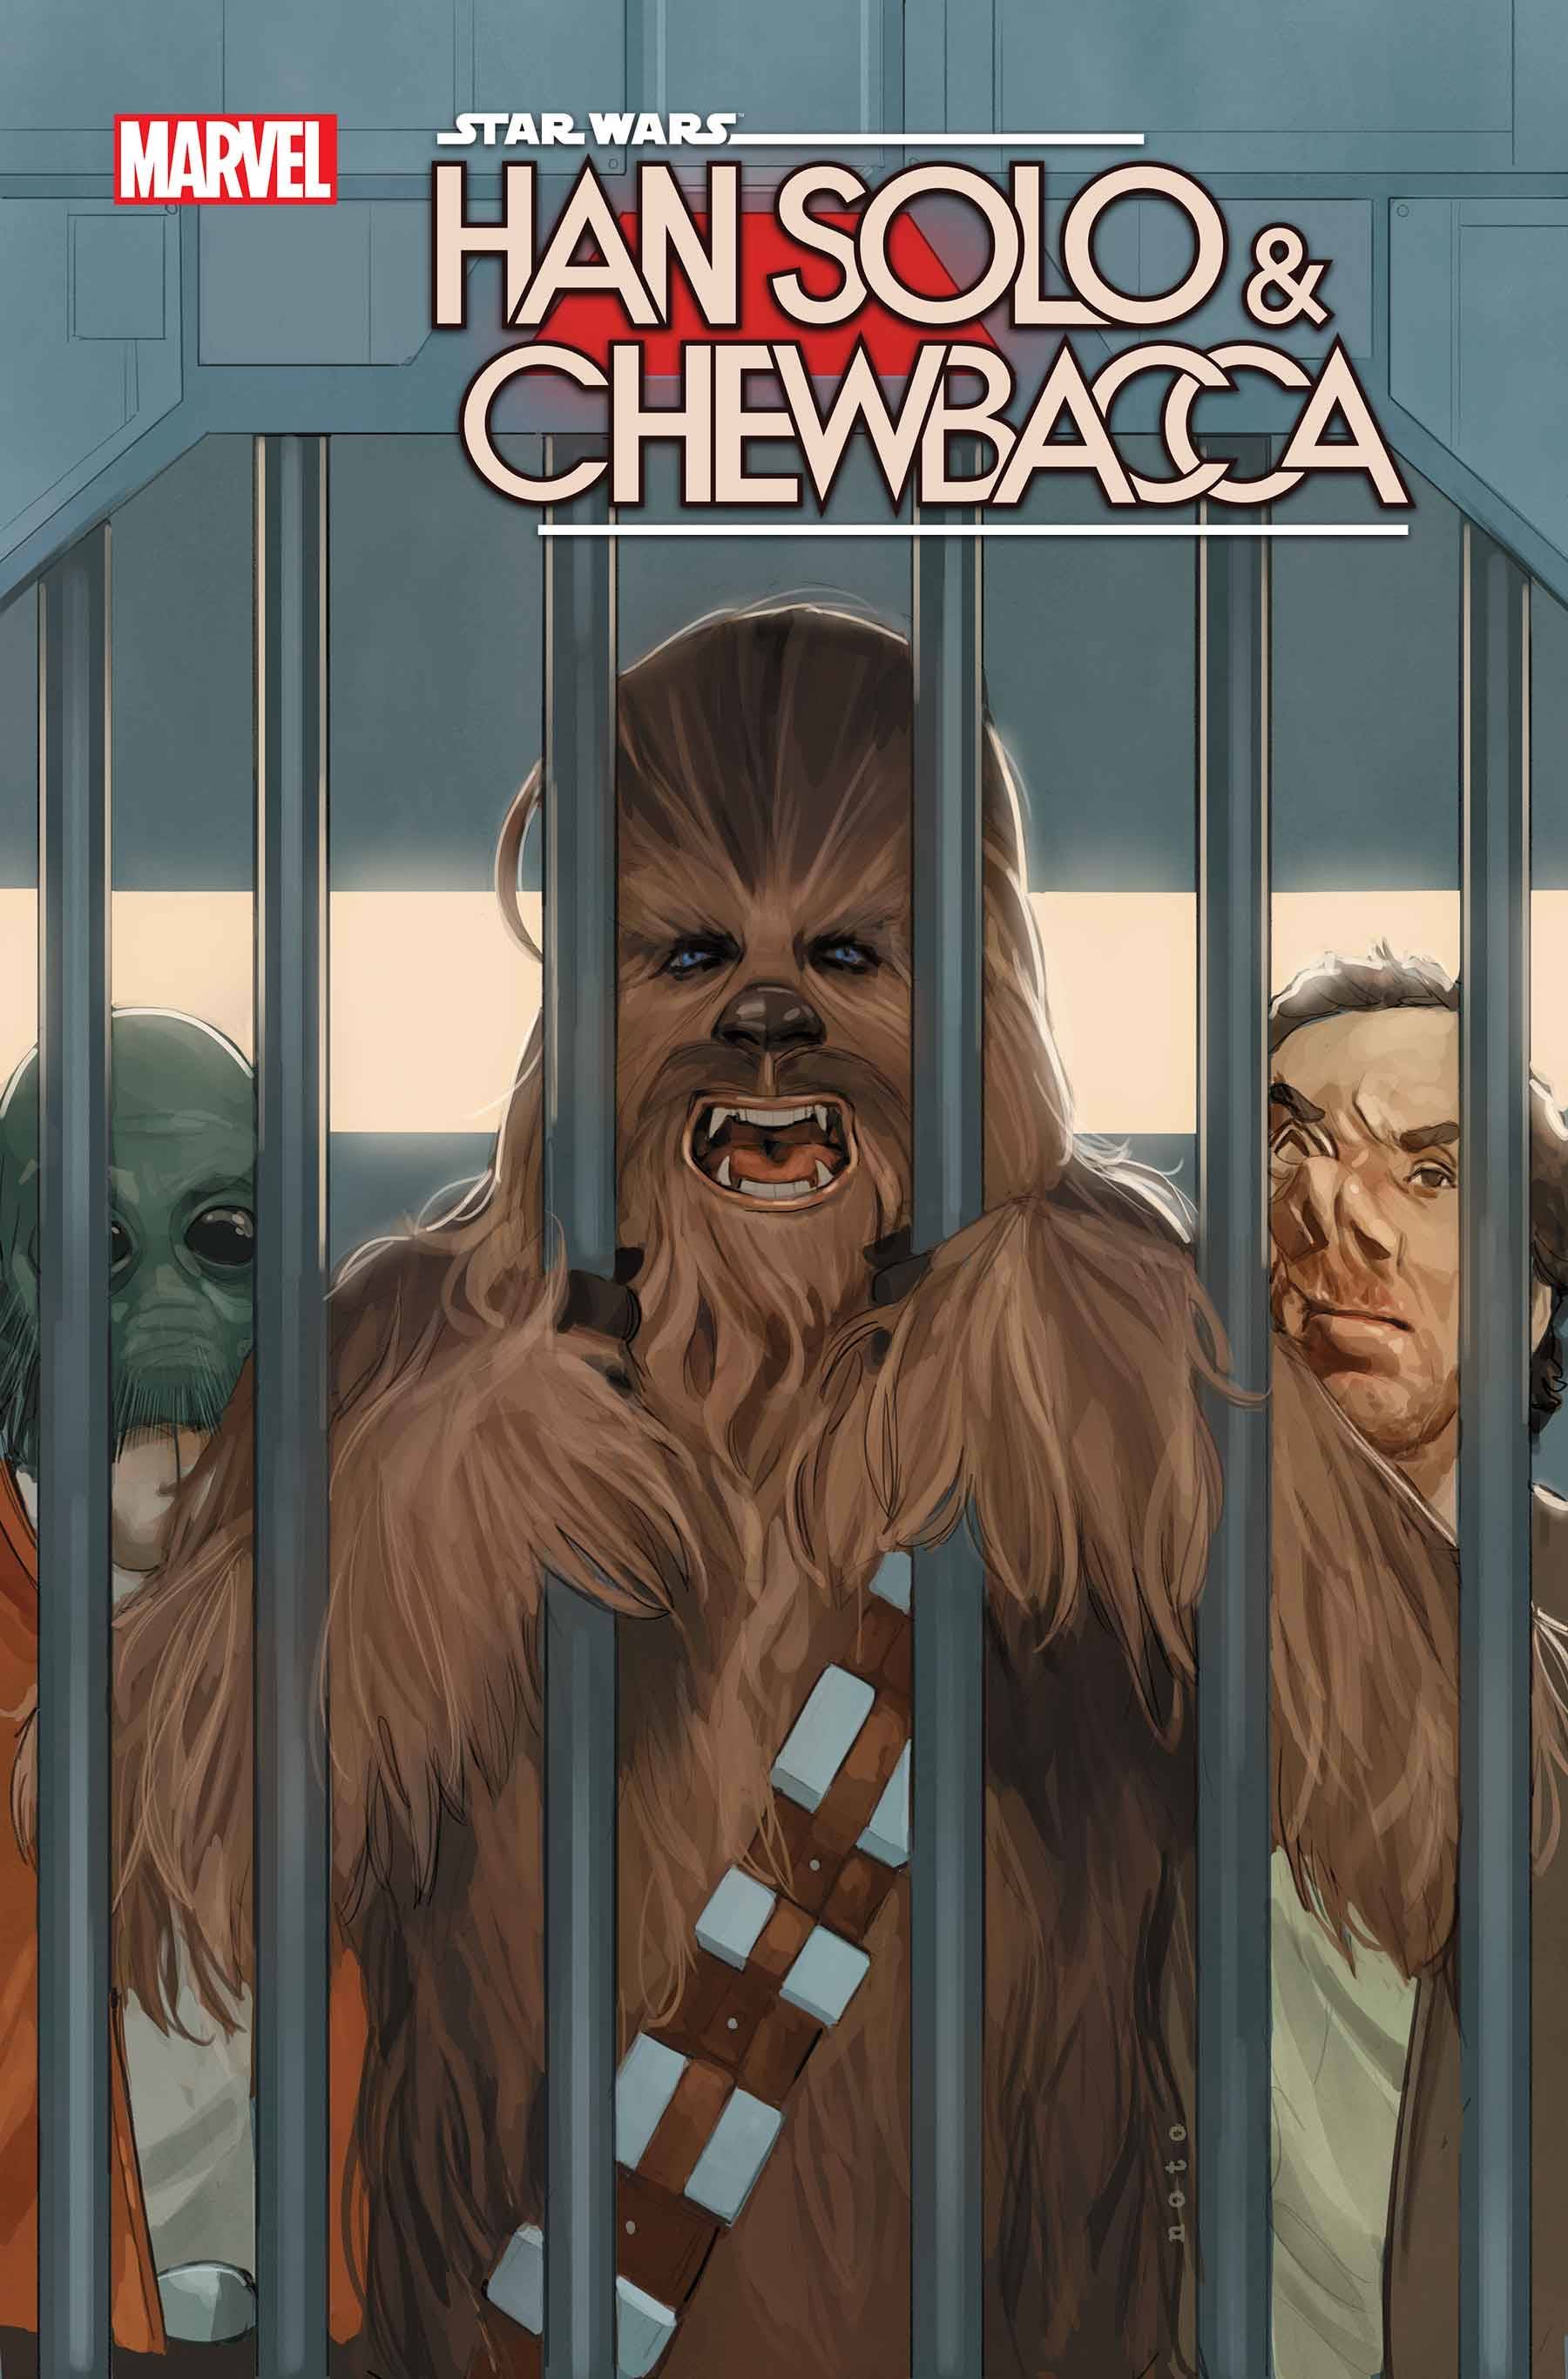 STAR WARS HAN SOLO CHEWBACCA #6 (RES)